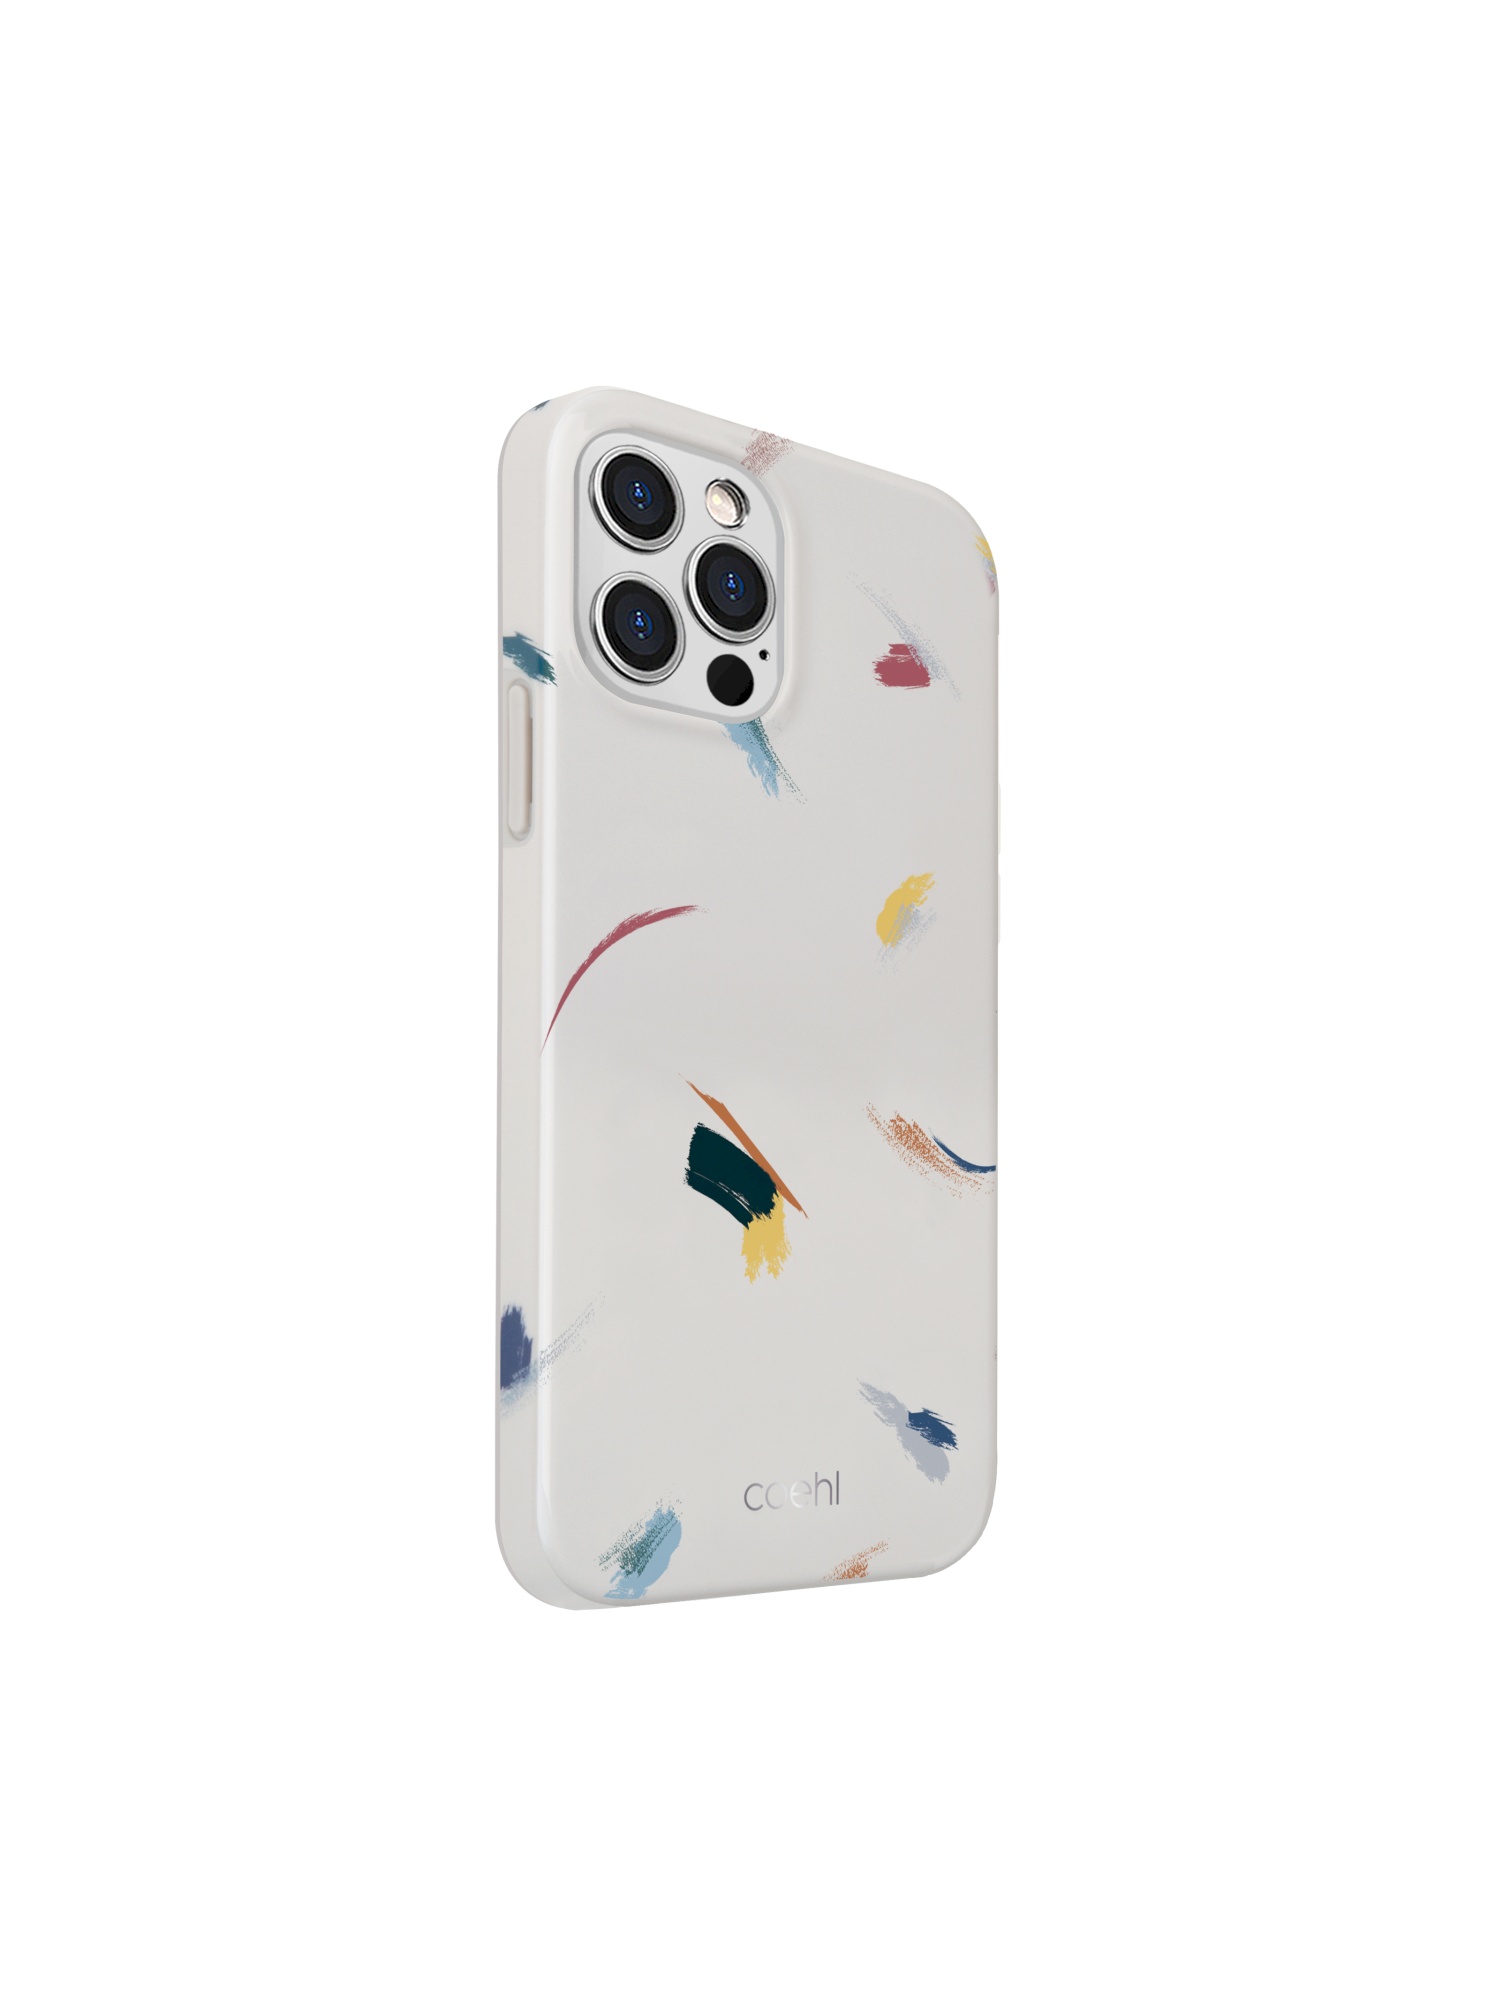 iPhone 12/12 Pro, case coehl reverie soft ivory, white